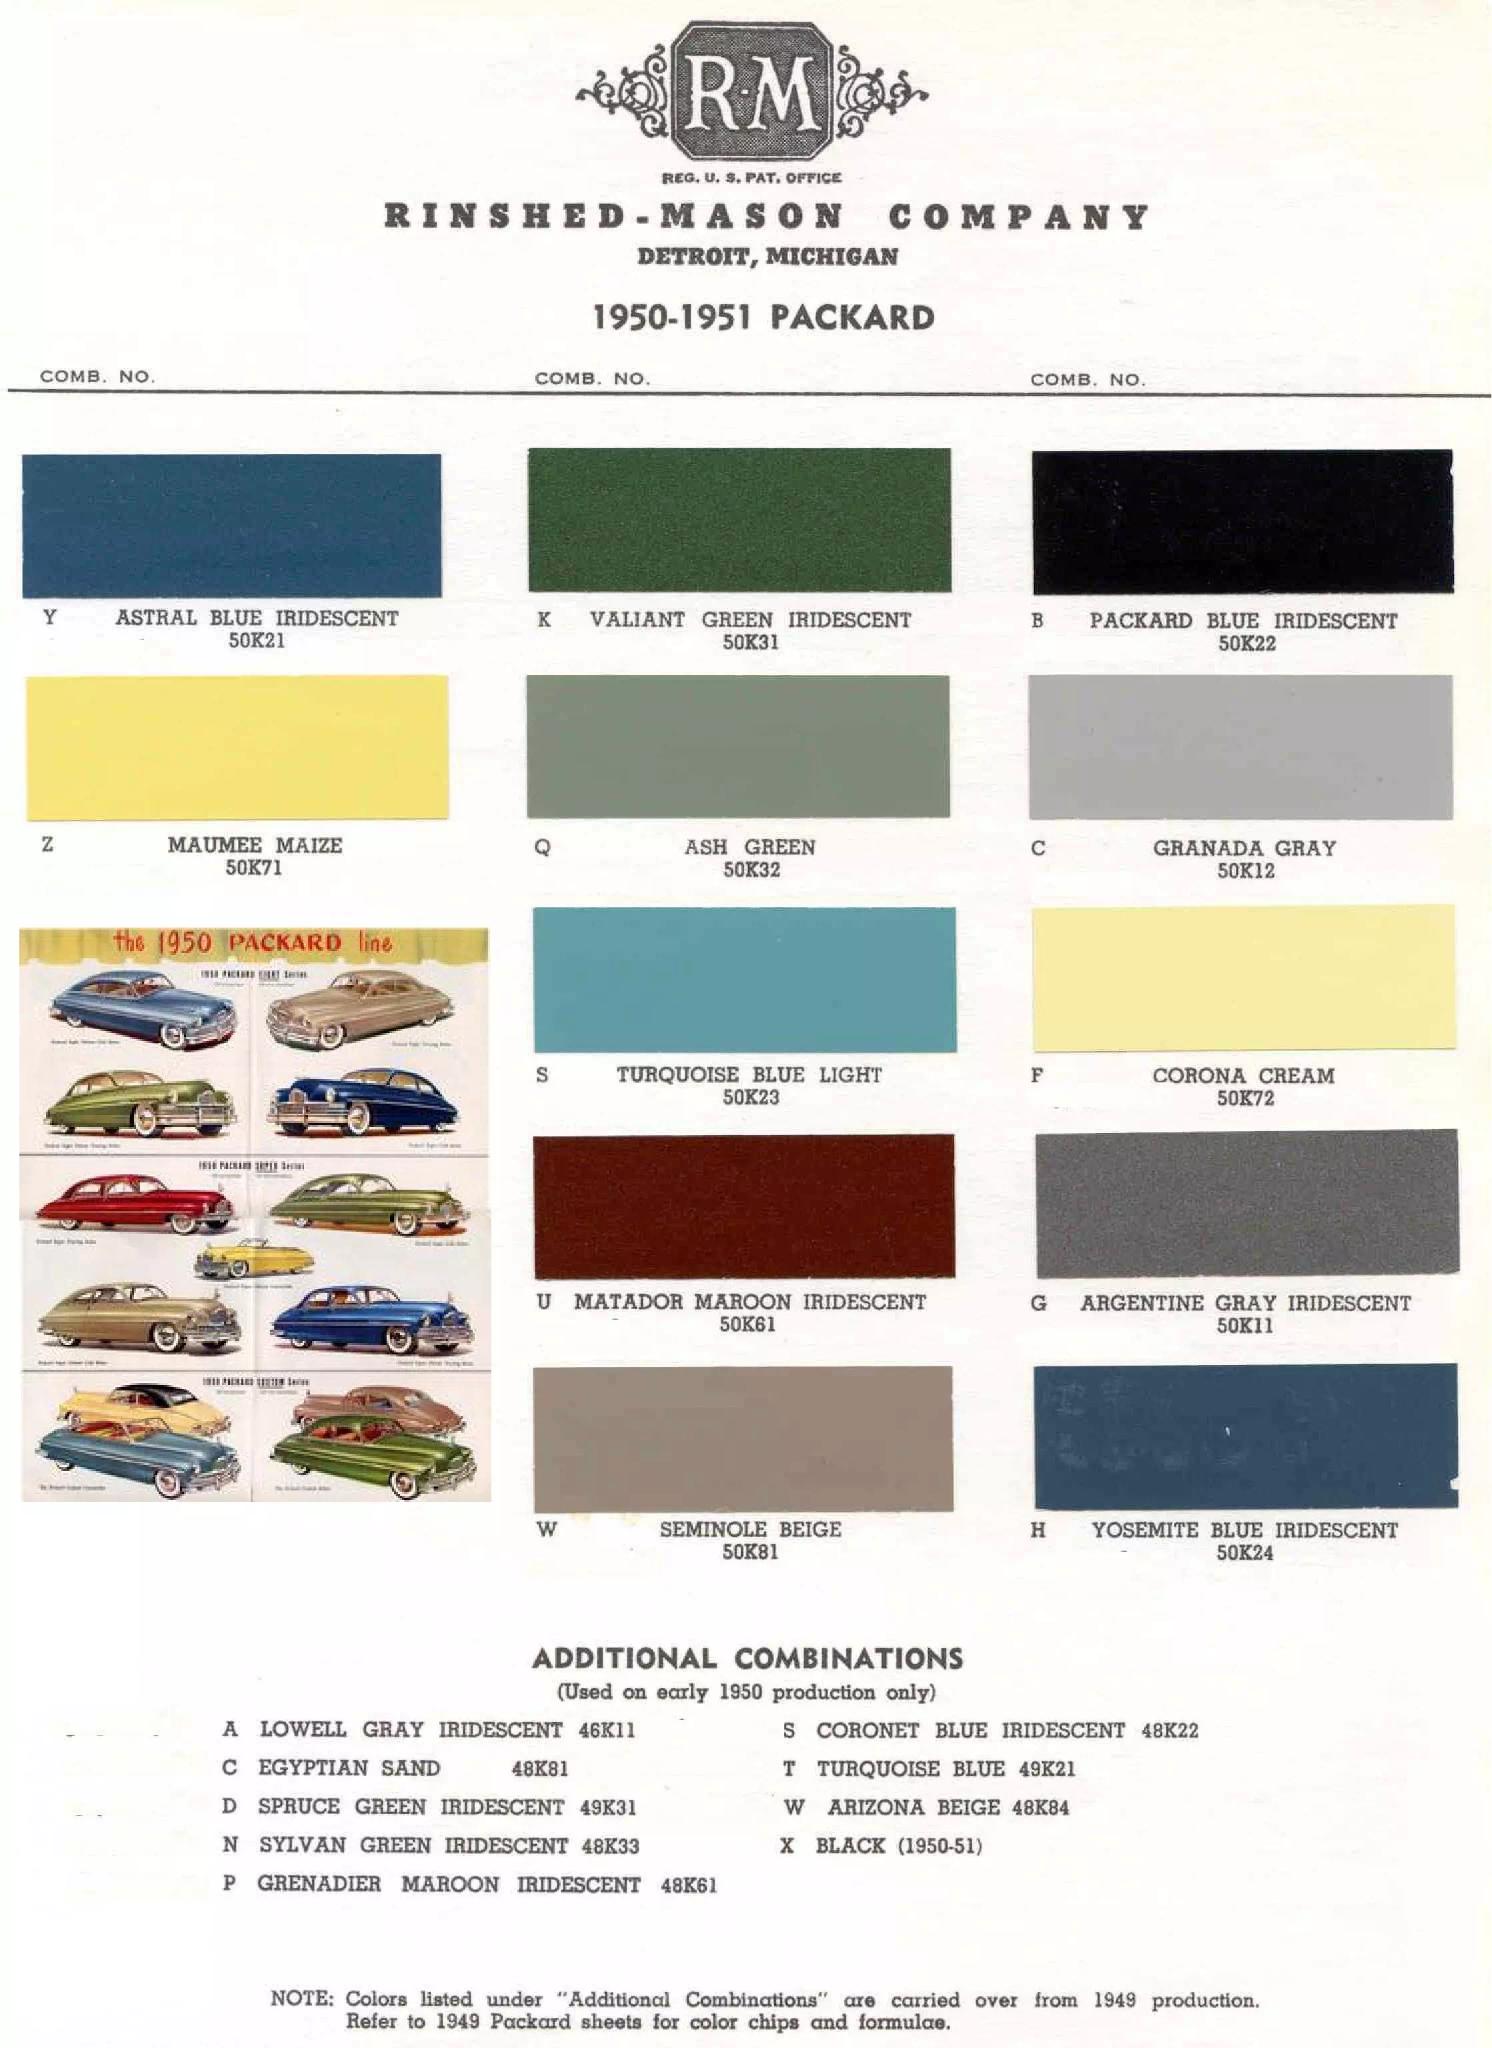 Summary of all Colors and Codes used on Packard